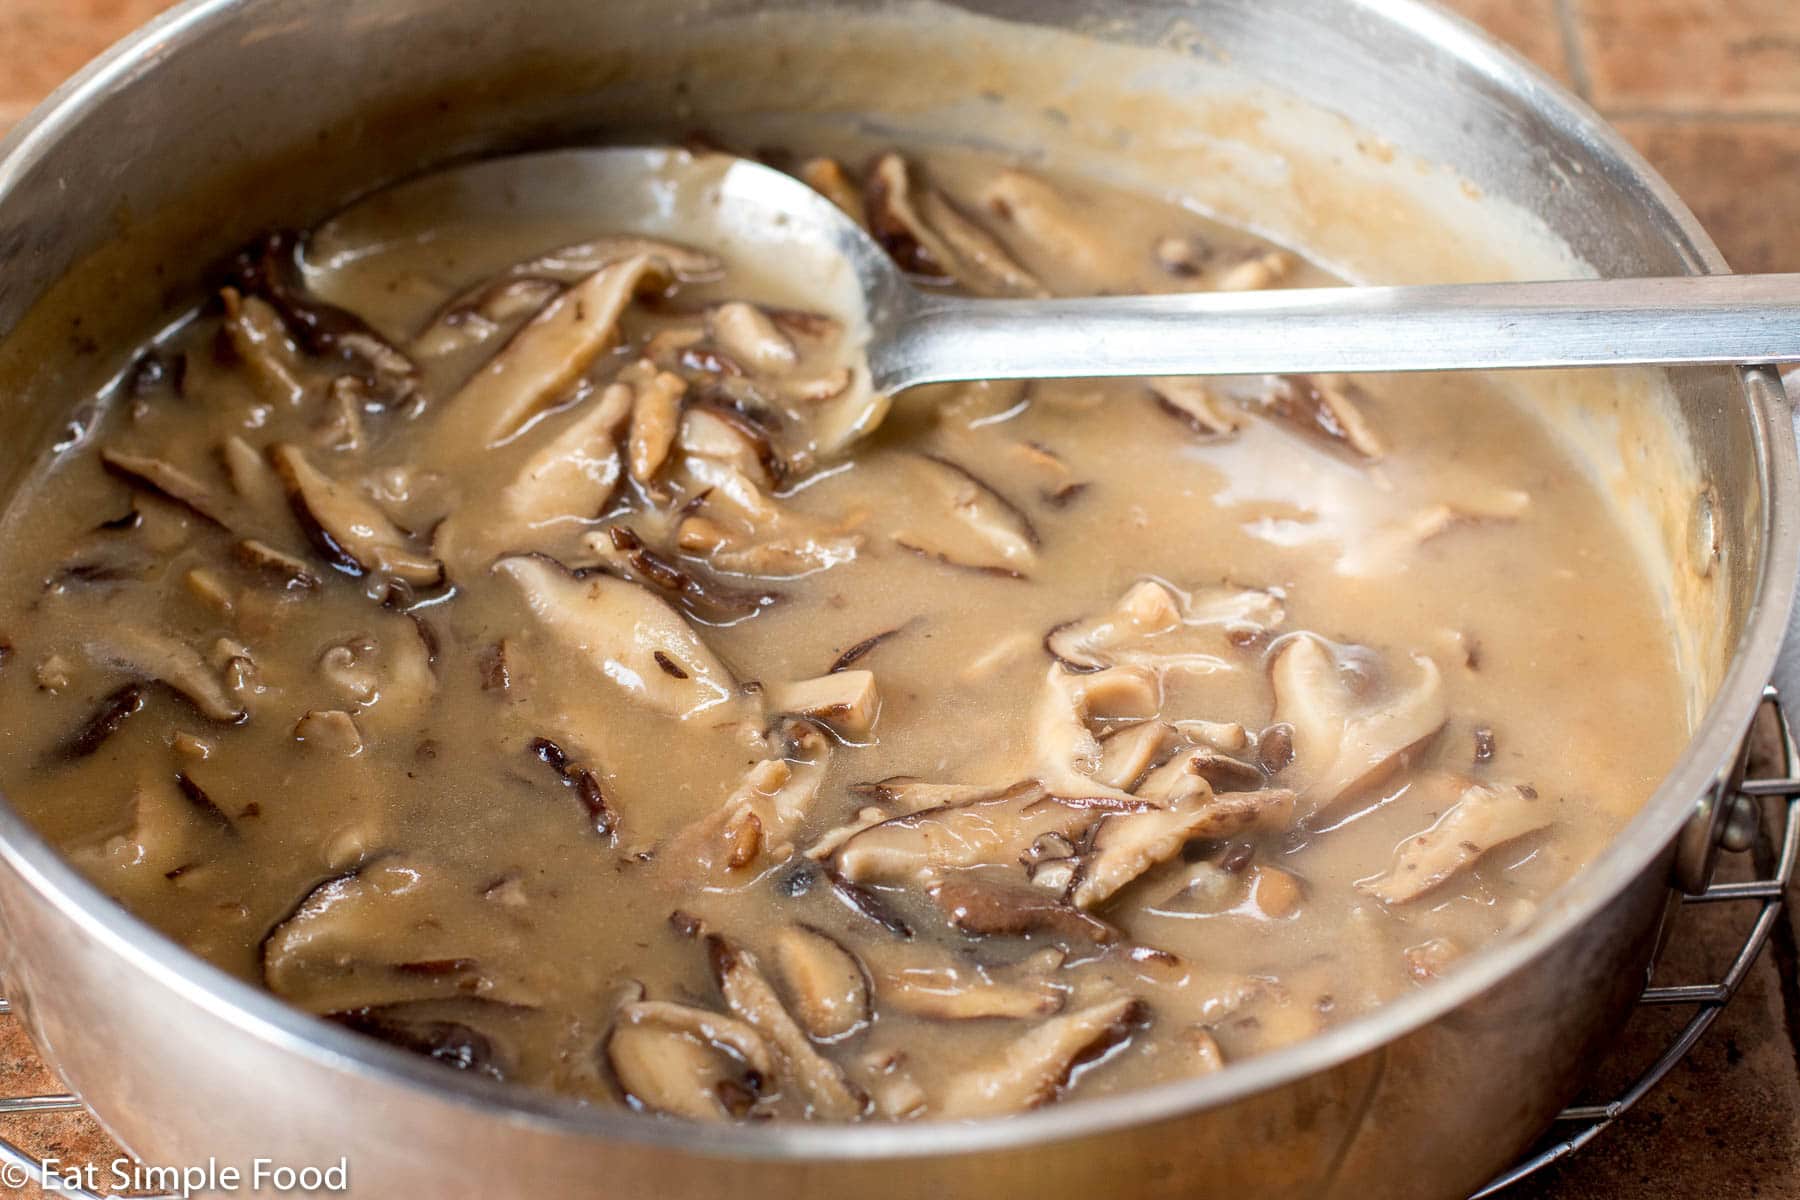 Sliced Mushroom chunky Gravy Recipe in Stainless Steel Pan with A Spoon